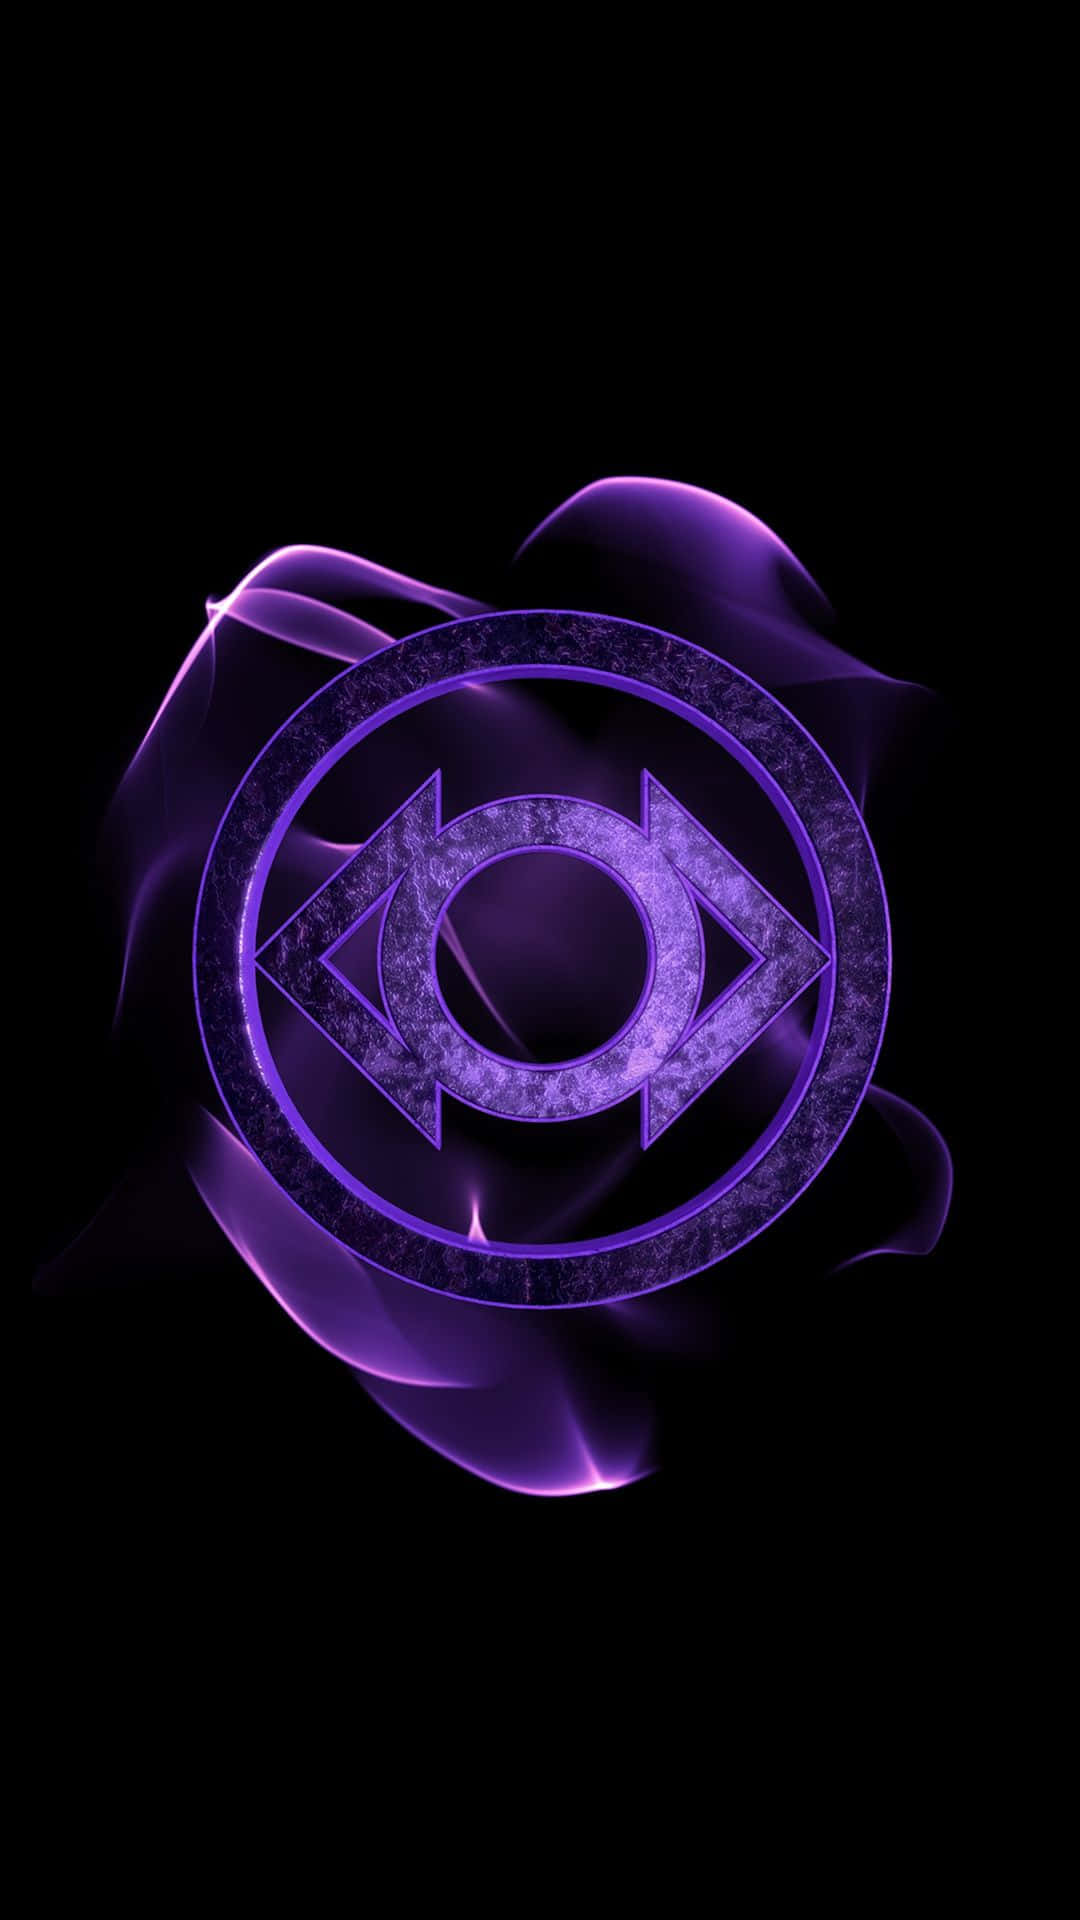 A Purple Symbol With A Black Background